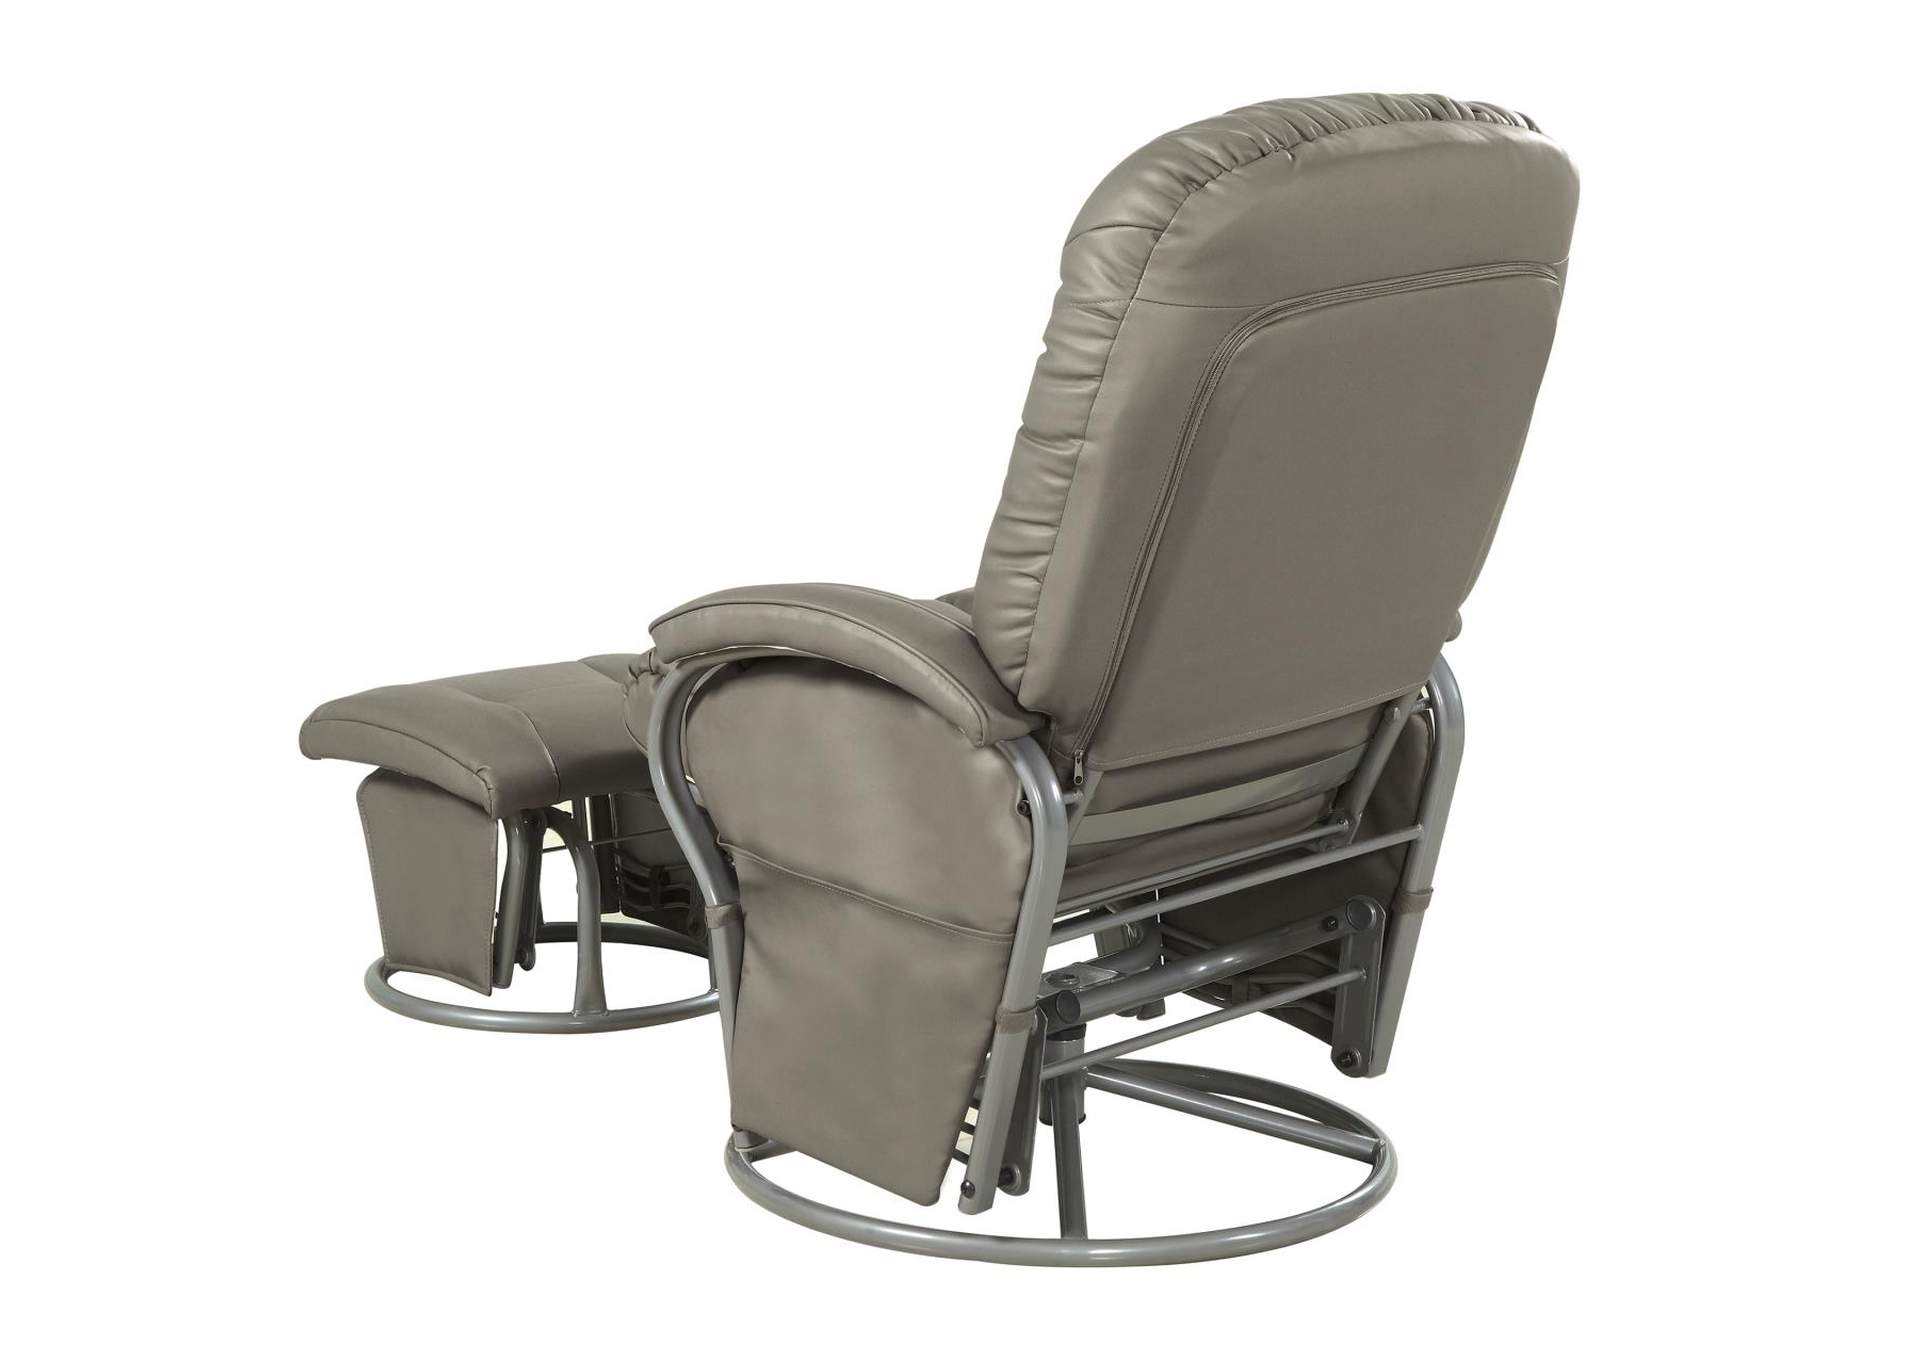 Push-back Glider Recliner with Ottoman Beige and Silver,Coaster Furniture